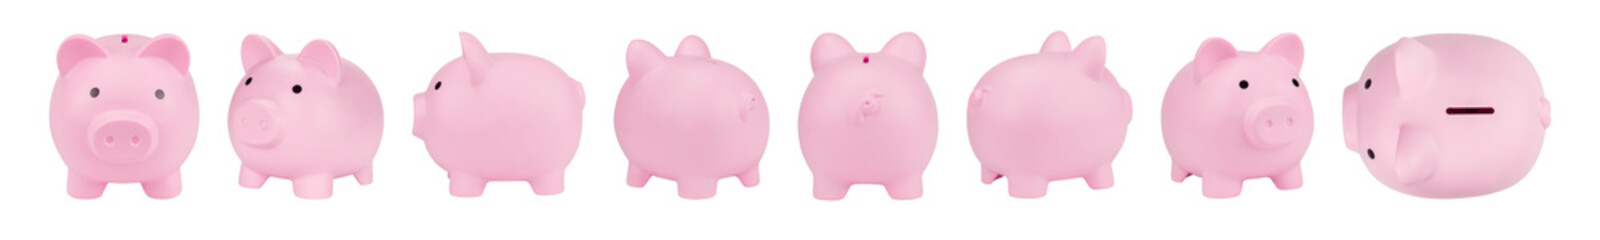 Collection of Pink piggy bank isolated on white background with clipping path.